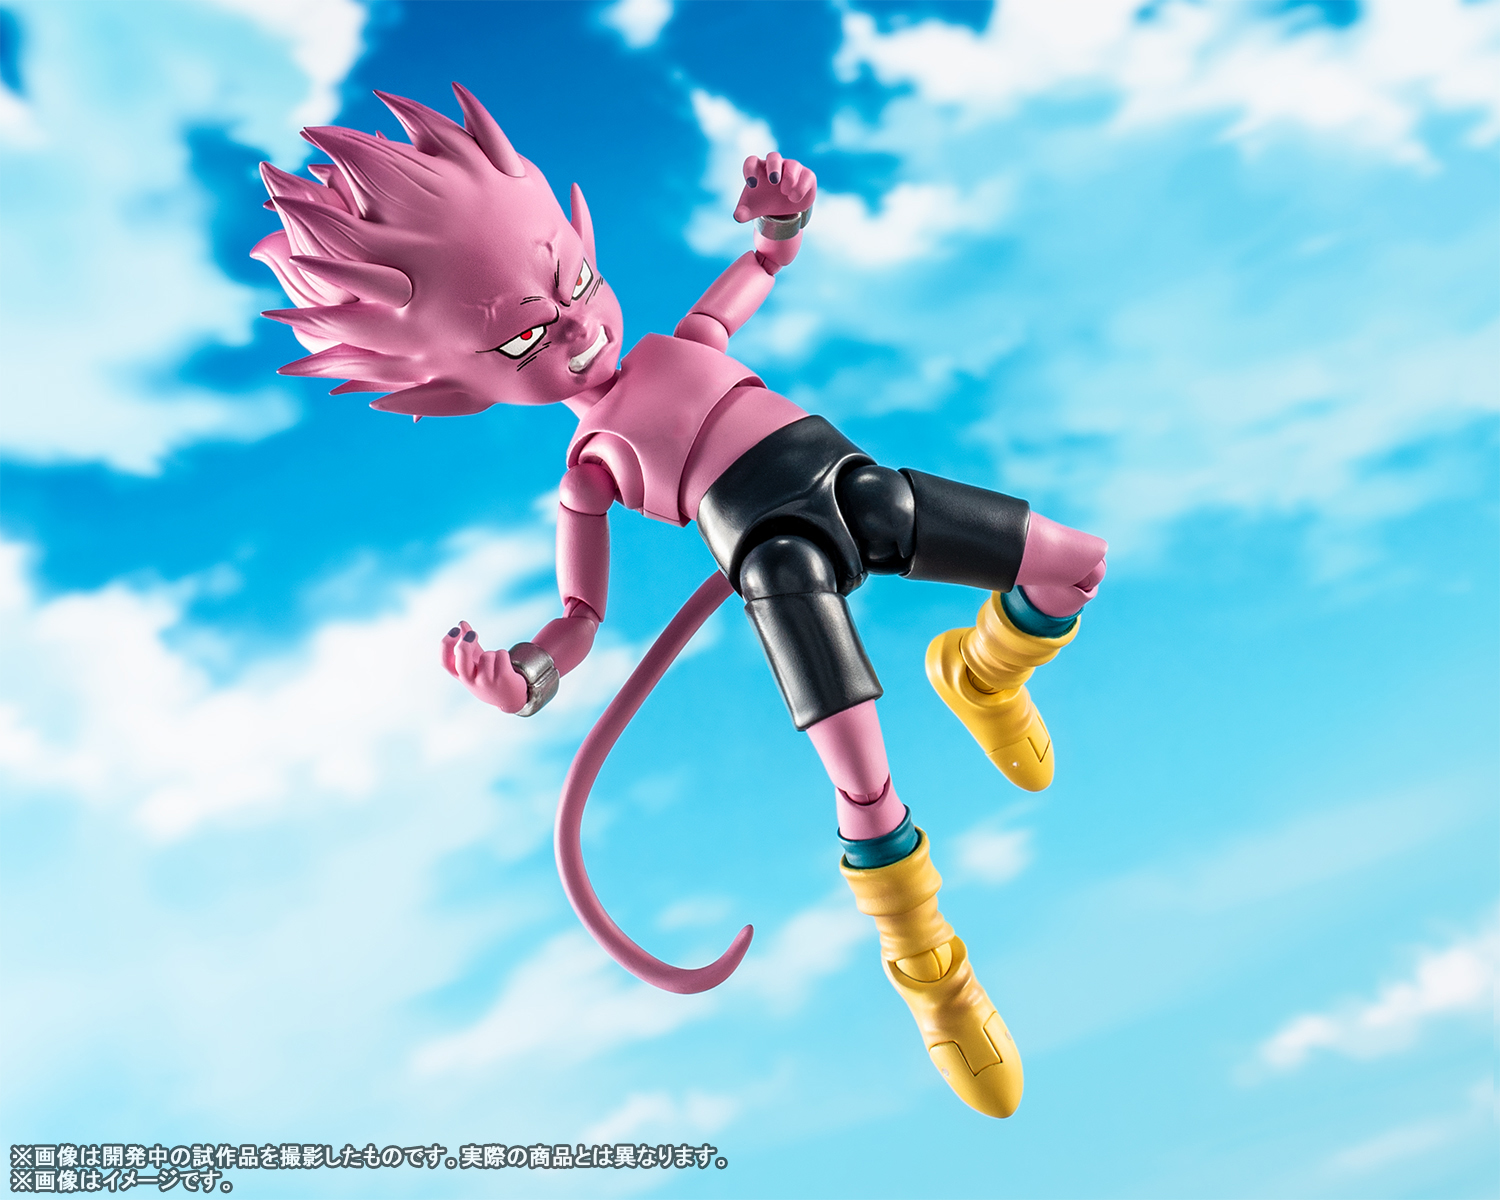 Images from "S.H.Figuarts BEELZEBUB